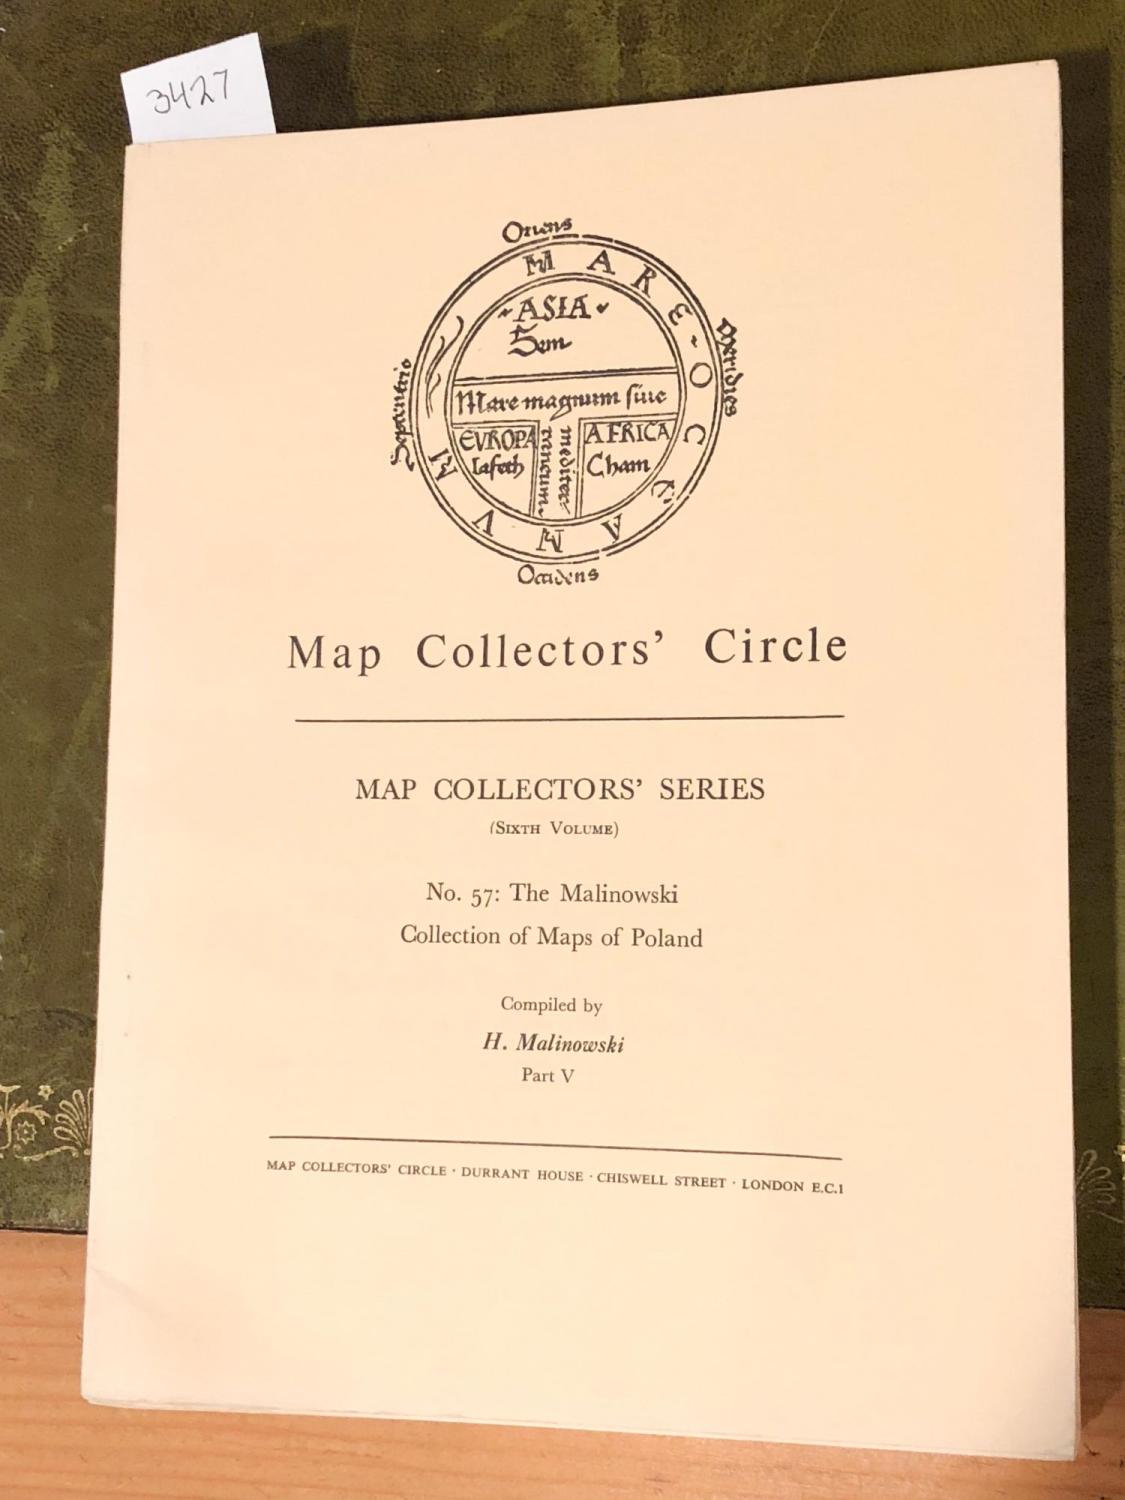 Interpret pot hurt MAP COLLECTORS' CIRCLE No. 57 (1 issue) The Malinowski Collection of Maps  of Poland Part V. by Tooley, R. V. (ed.) H. Malinowski: Very good Original  wraps (1969) First Edition. | Carydale Books